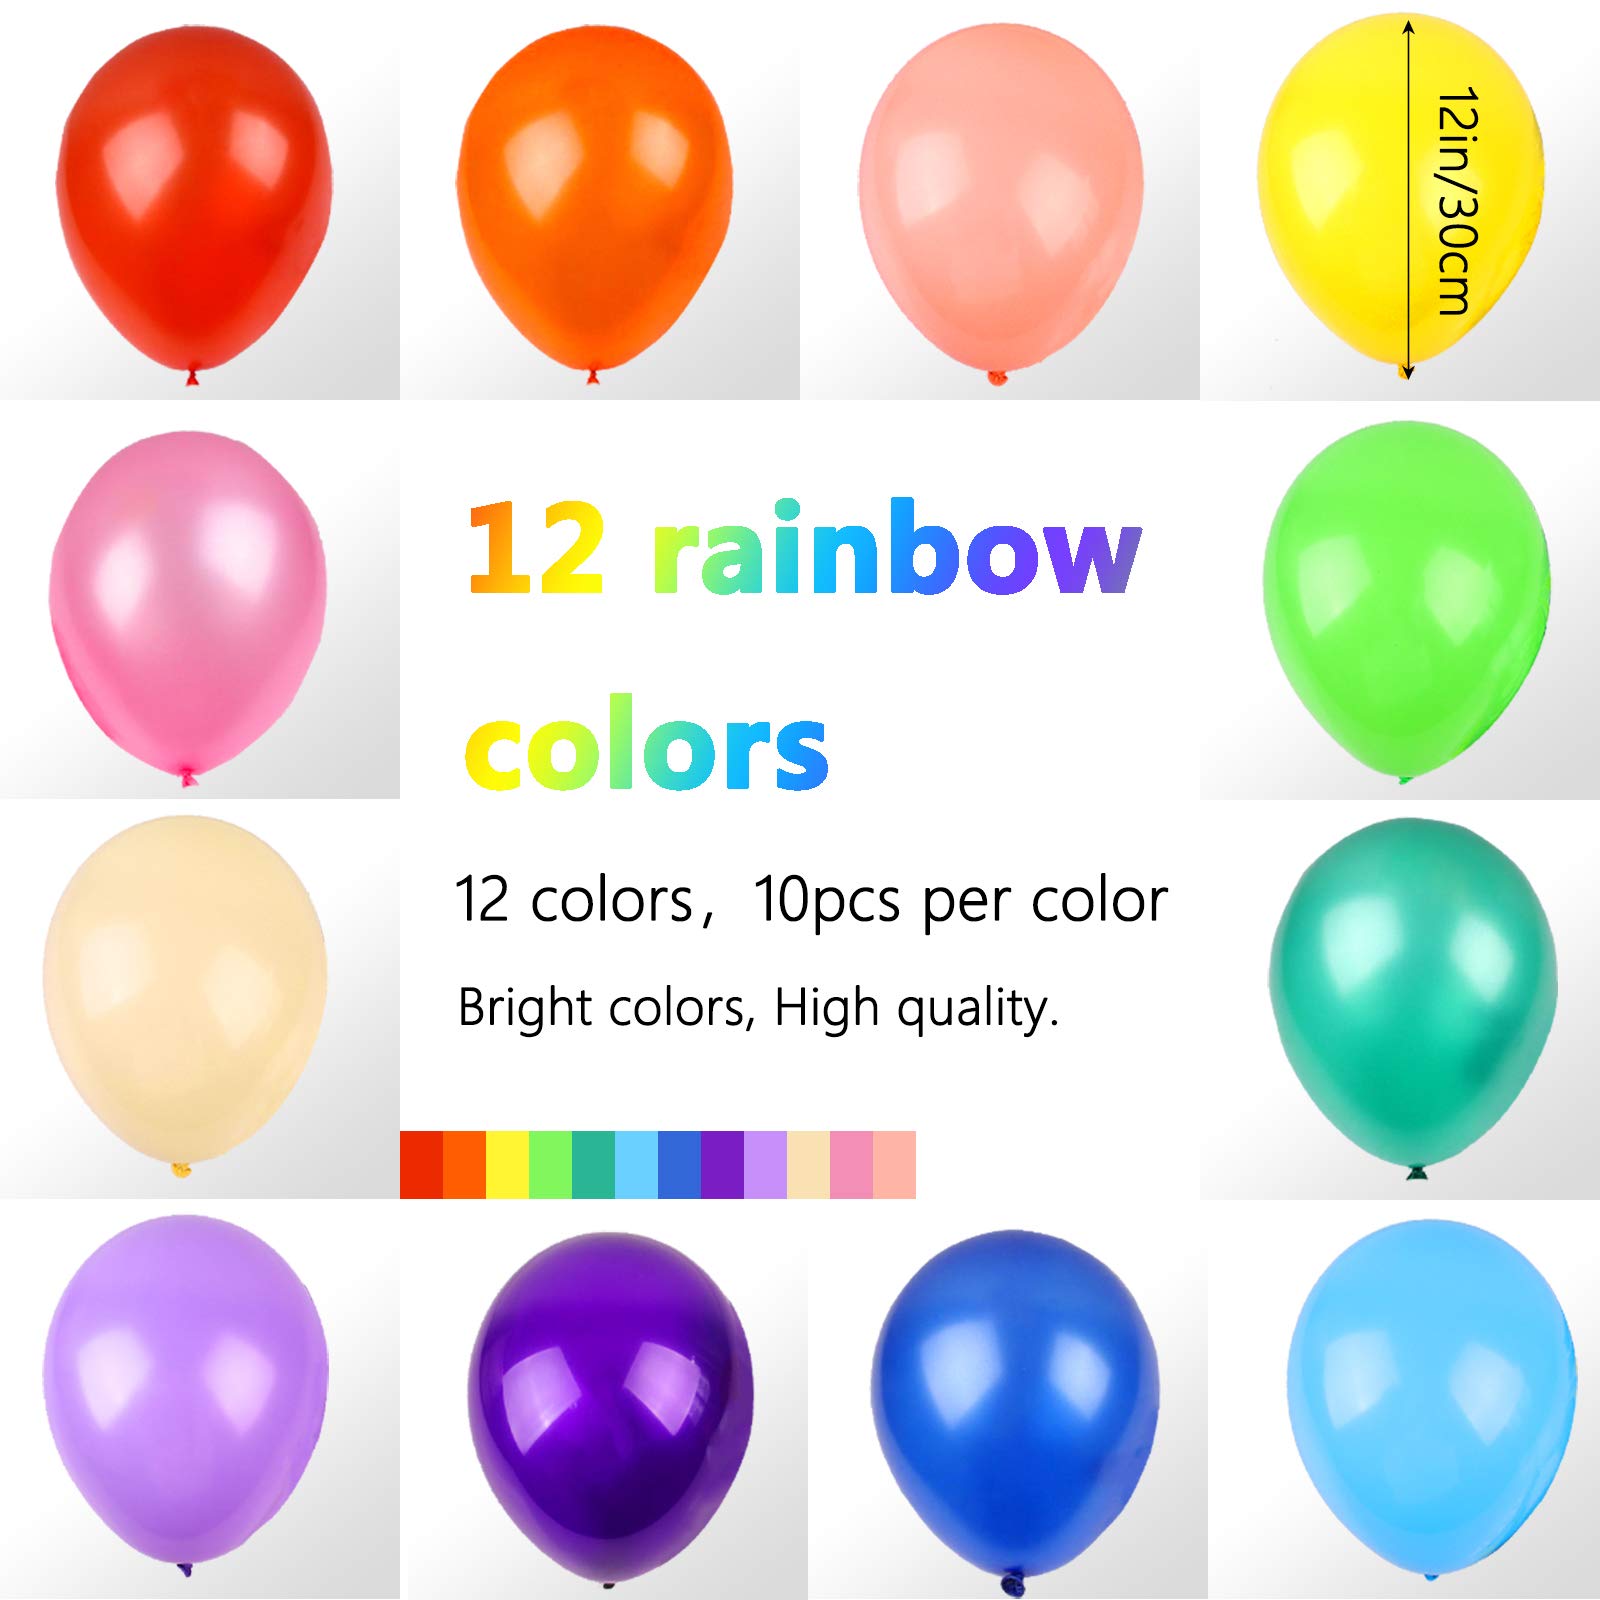 RUBFAC 120 Balloons Assorted Color 12 Inches 12 Kinds of Rainbow Latex Balloons, Multicolor Bright Balloons for Party Decoration, Birthday Party Supplies or Arch Decoration